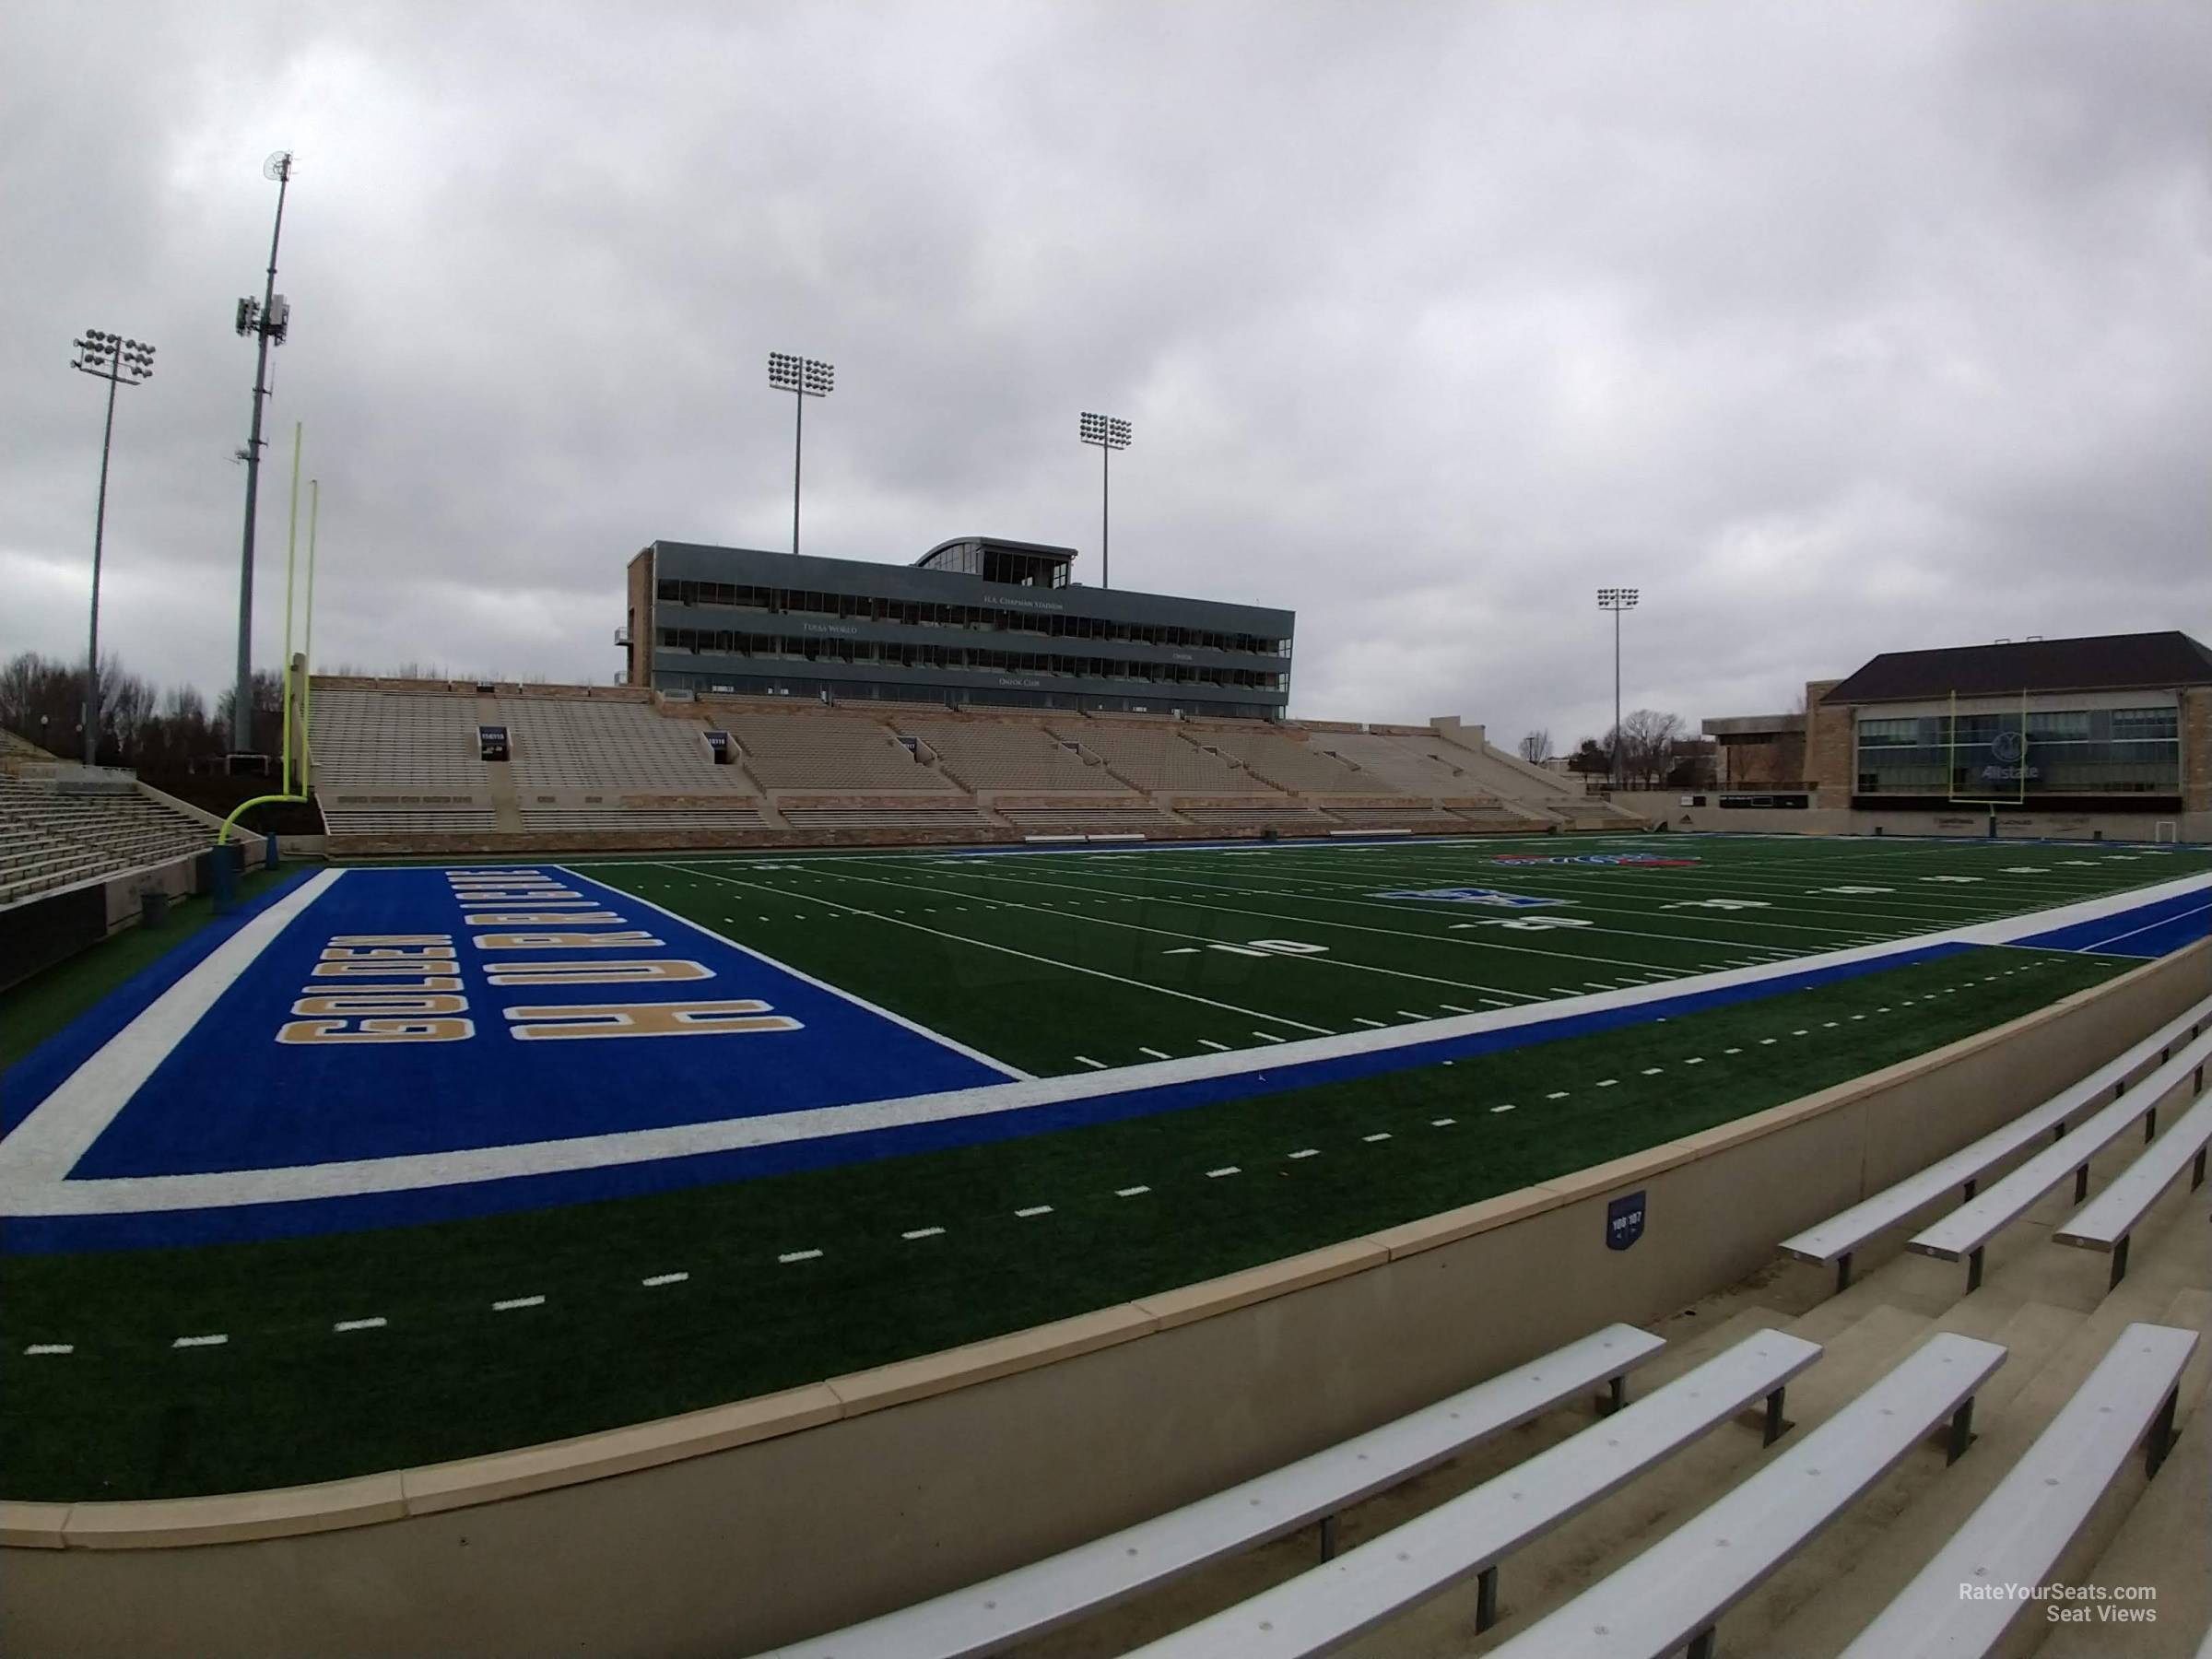 section 108, row 5 seat view  - h.a. chapman stadium